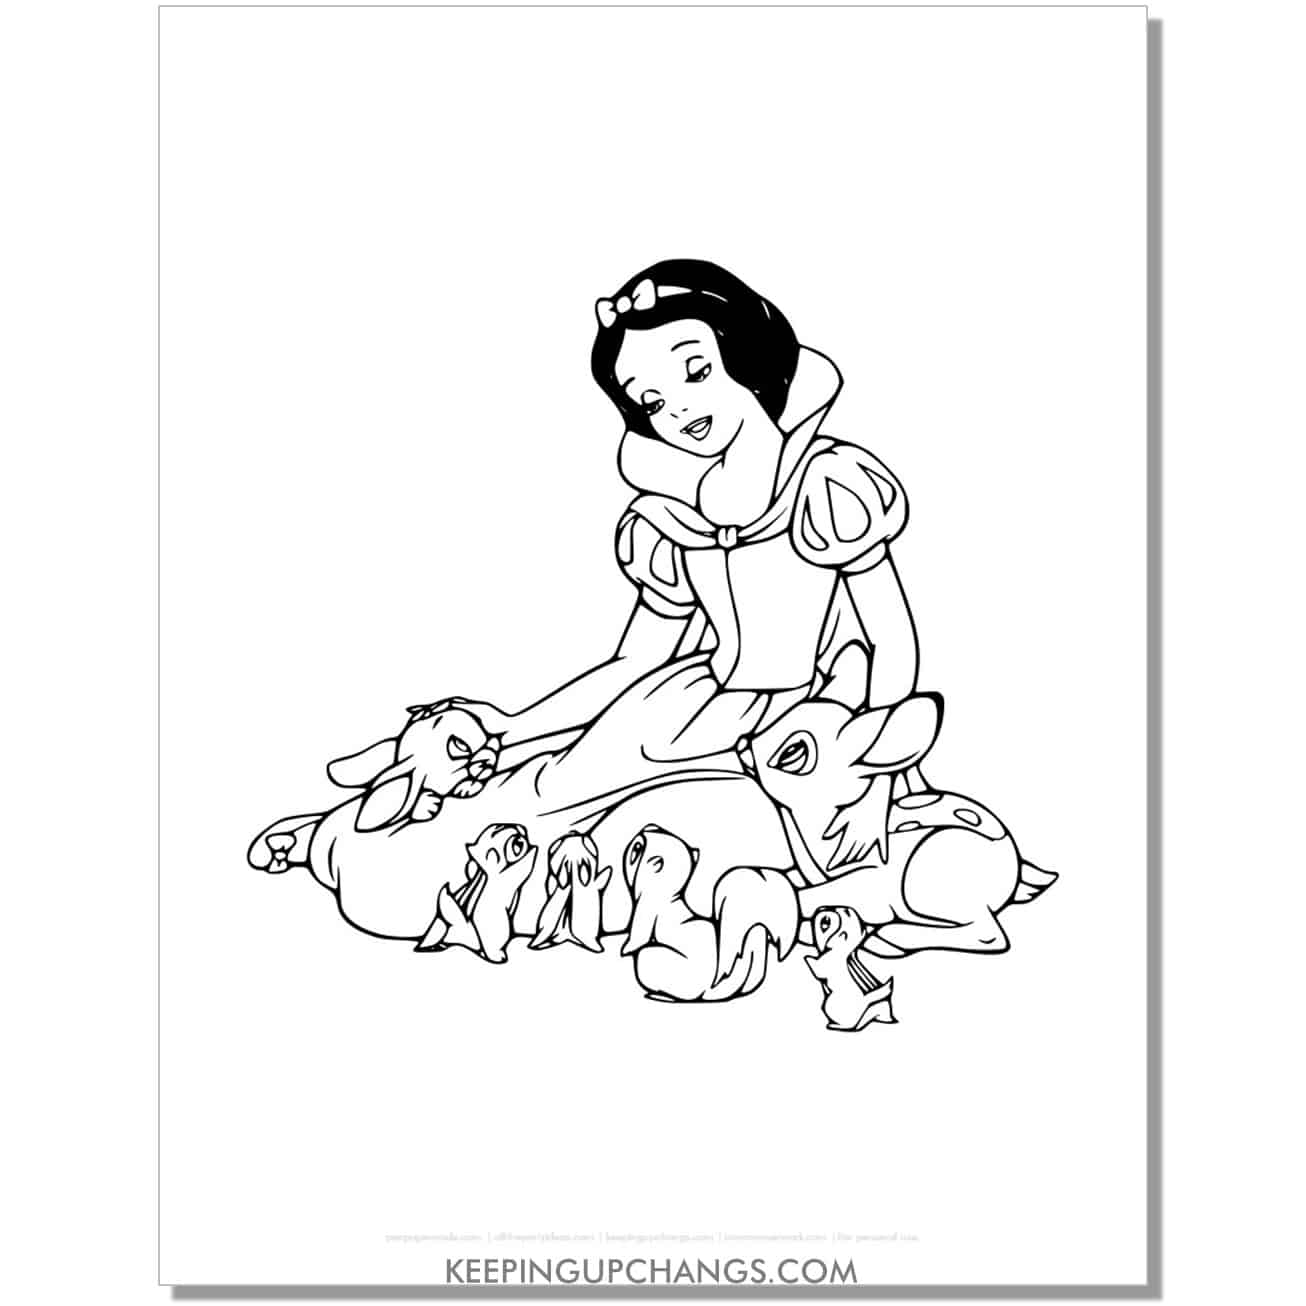 snow white sitting with rabbits, deer, squirrels coloring page, sheet.